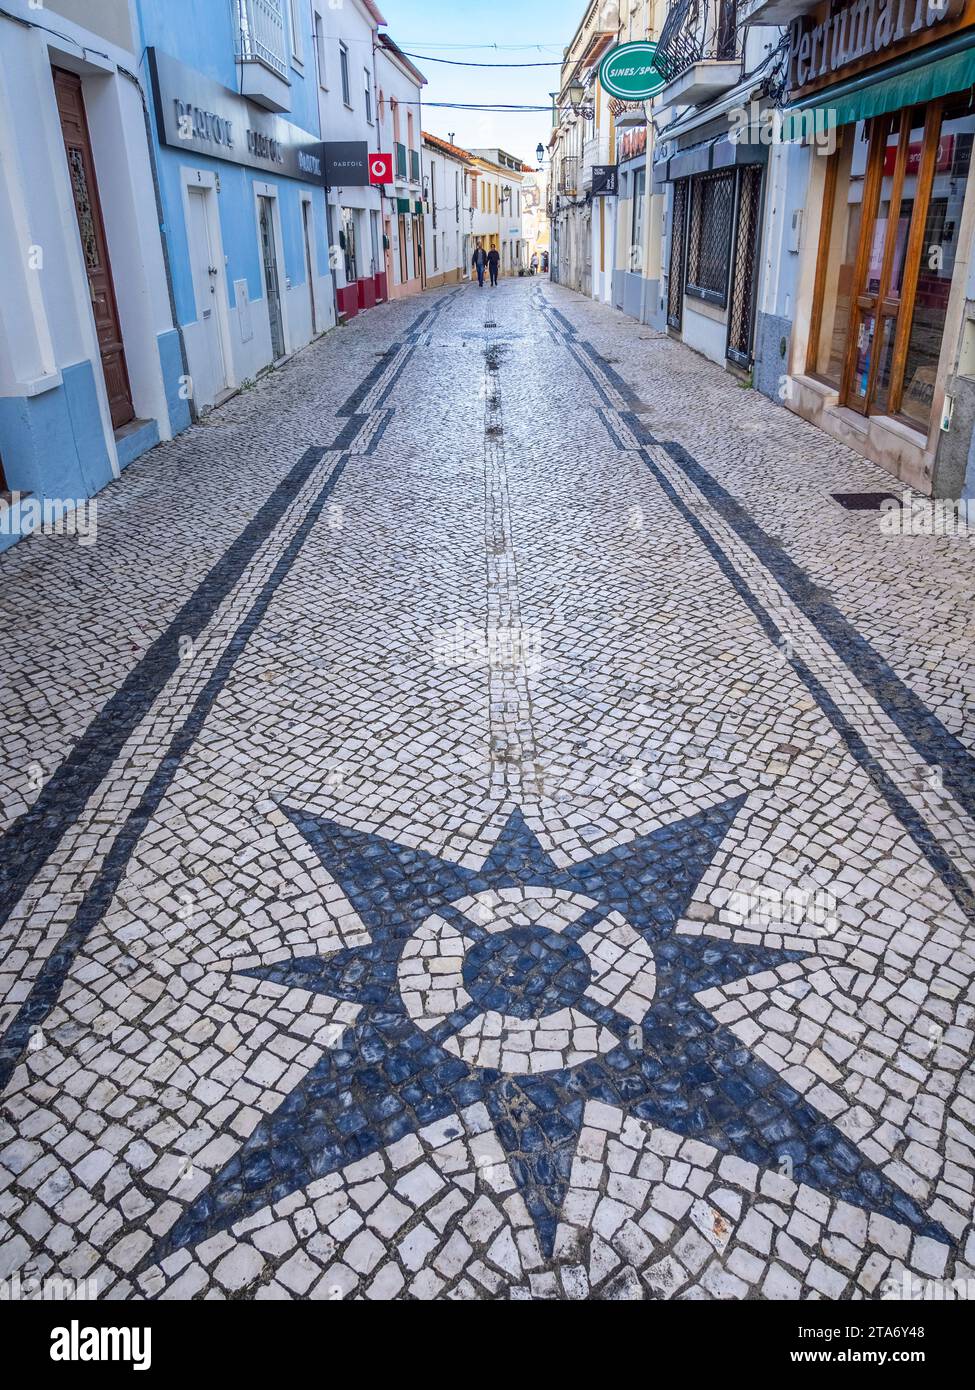 Portuguese tile street in the old section of the city of Sines in the Costa Azul region of Portugal Stock Photo